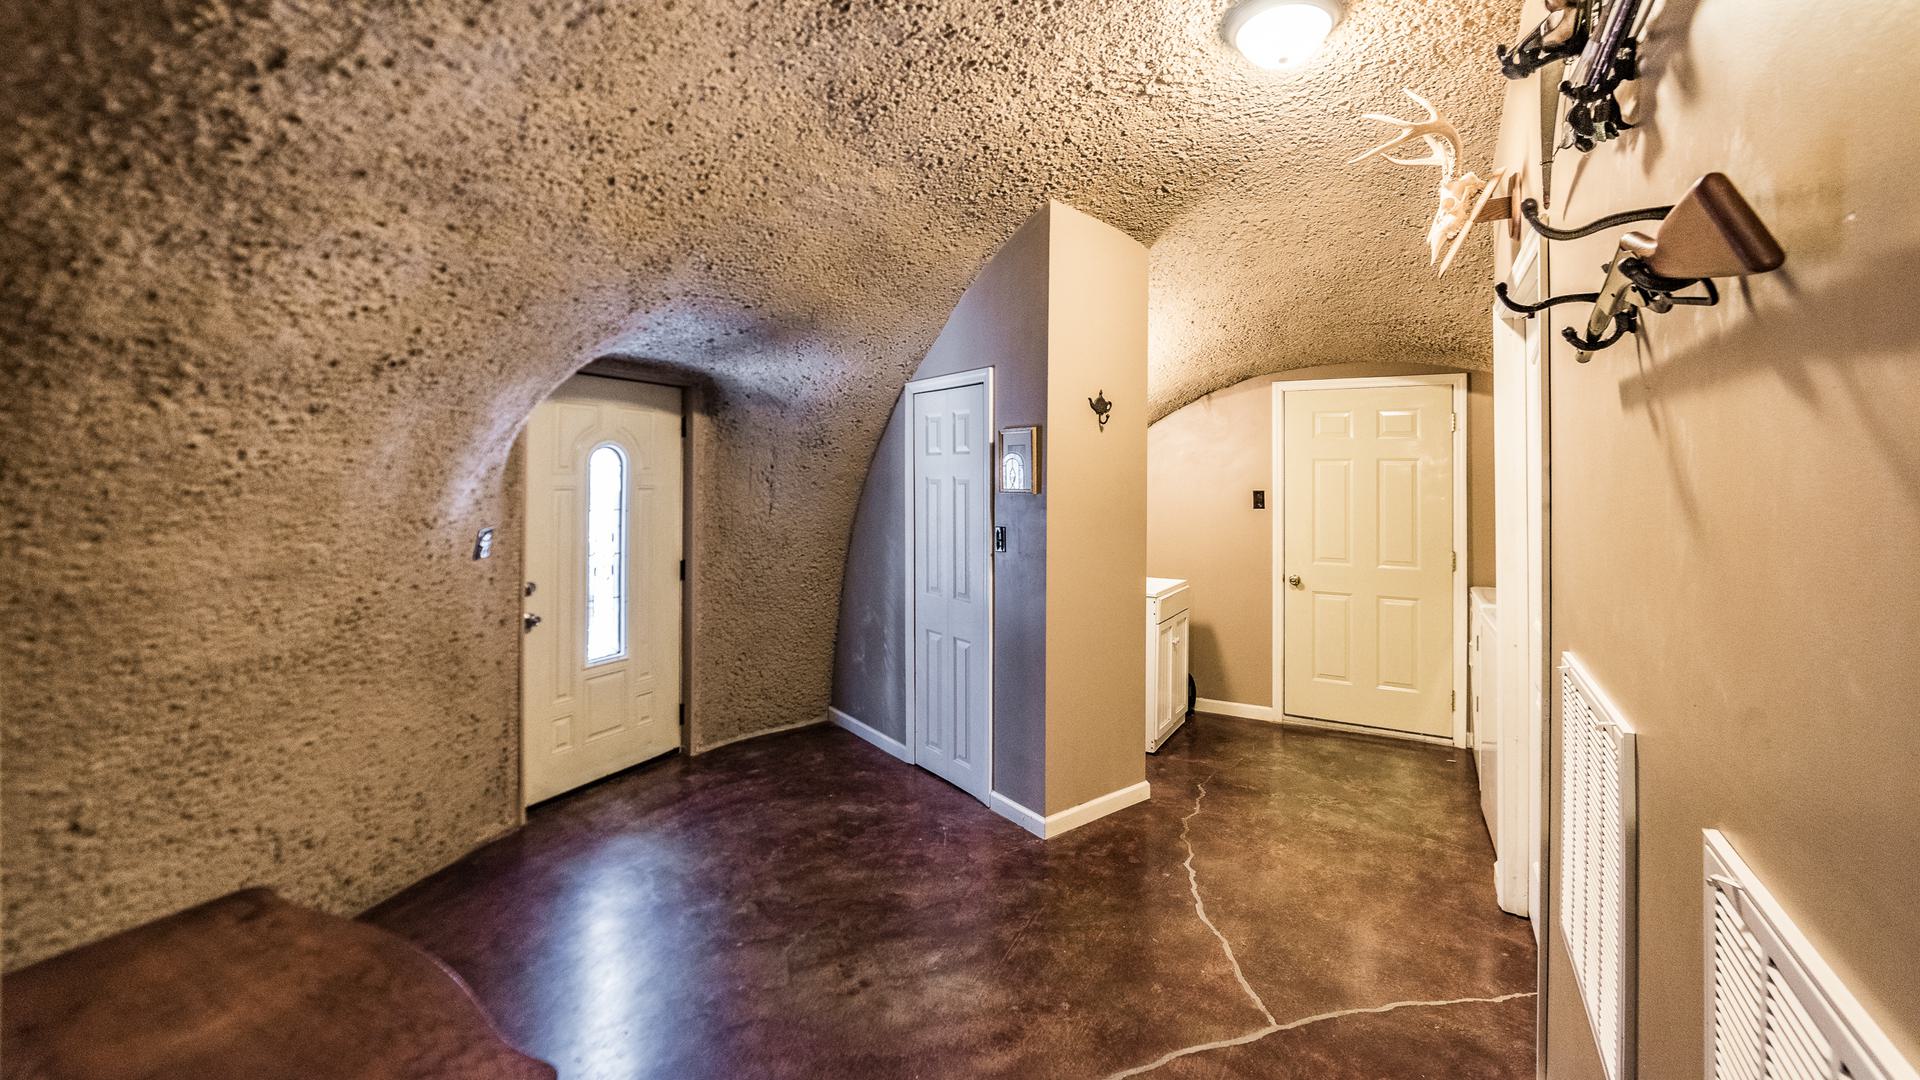 Middle mudroom and HVAC dome.